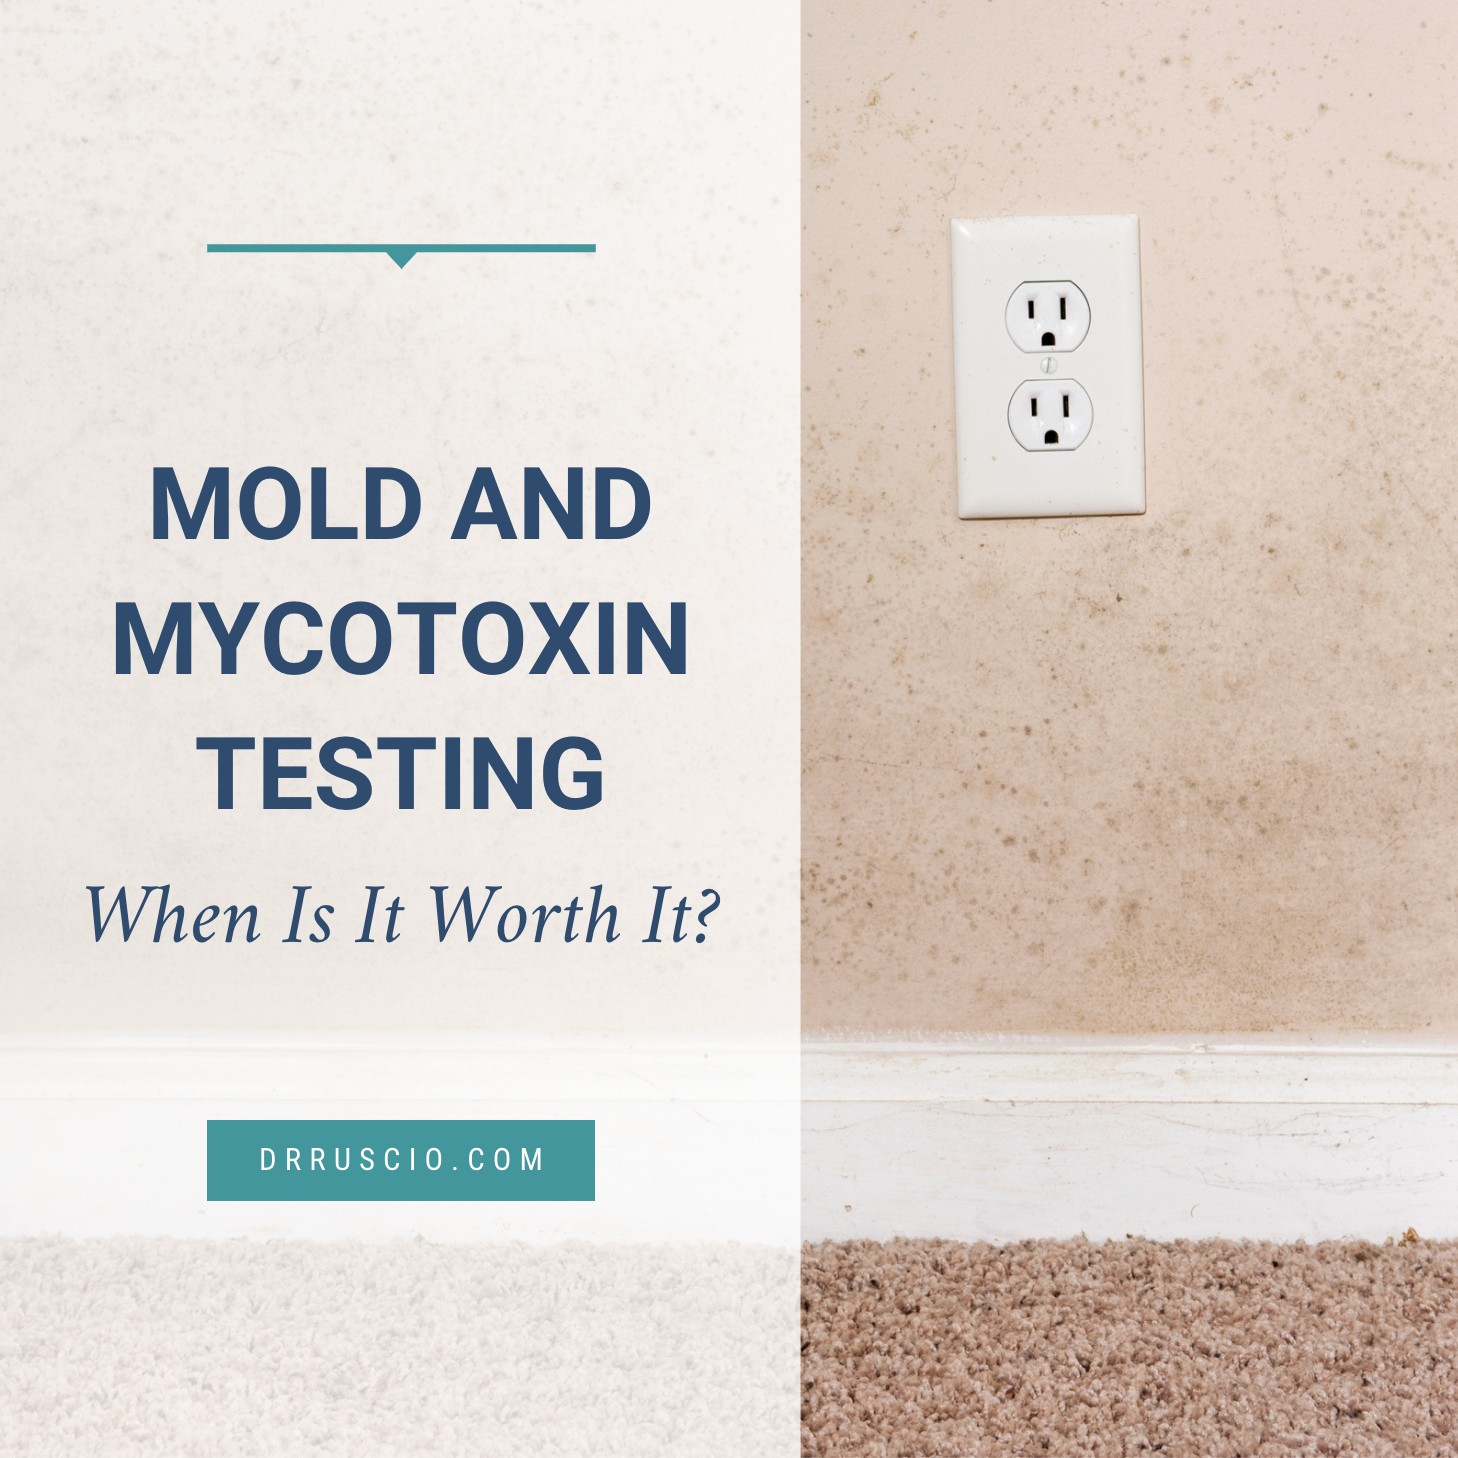 Mold and Mycotoxin Testing: When Is It Worth It?